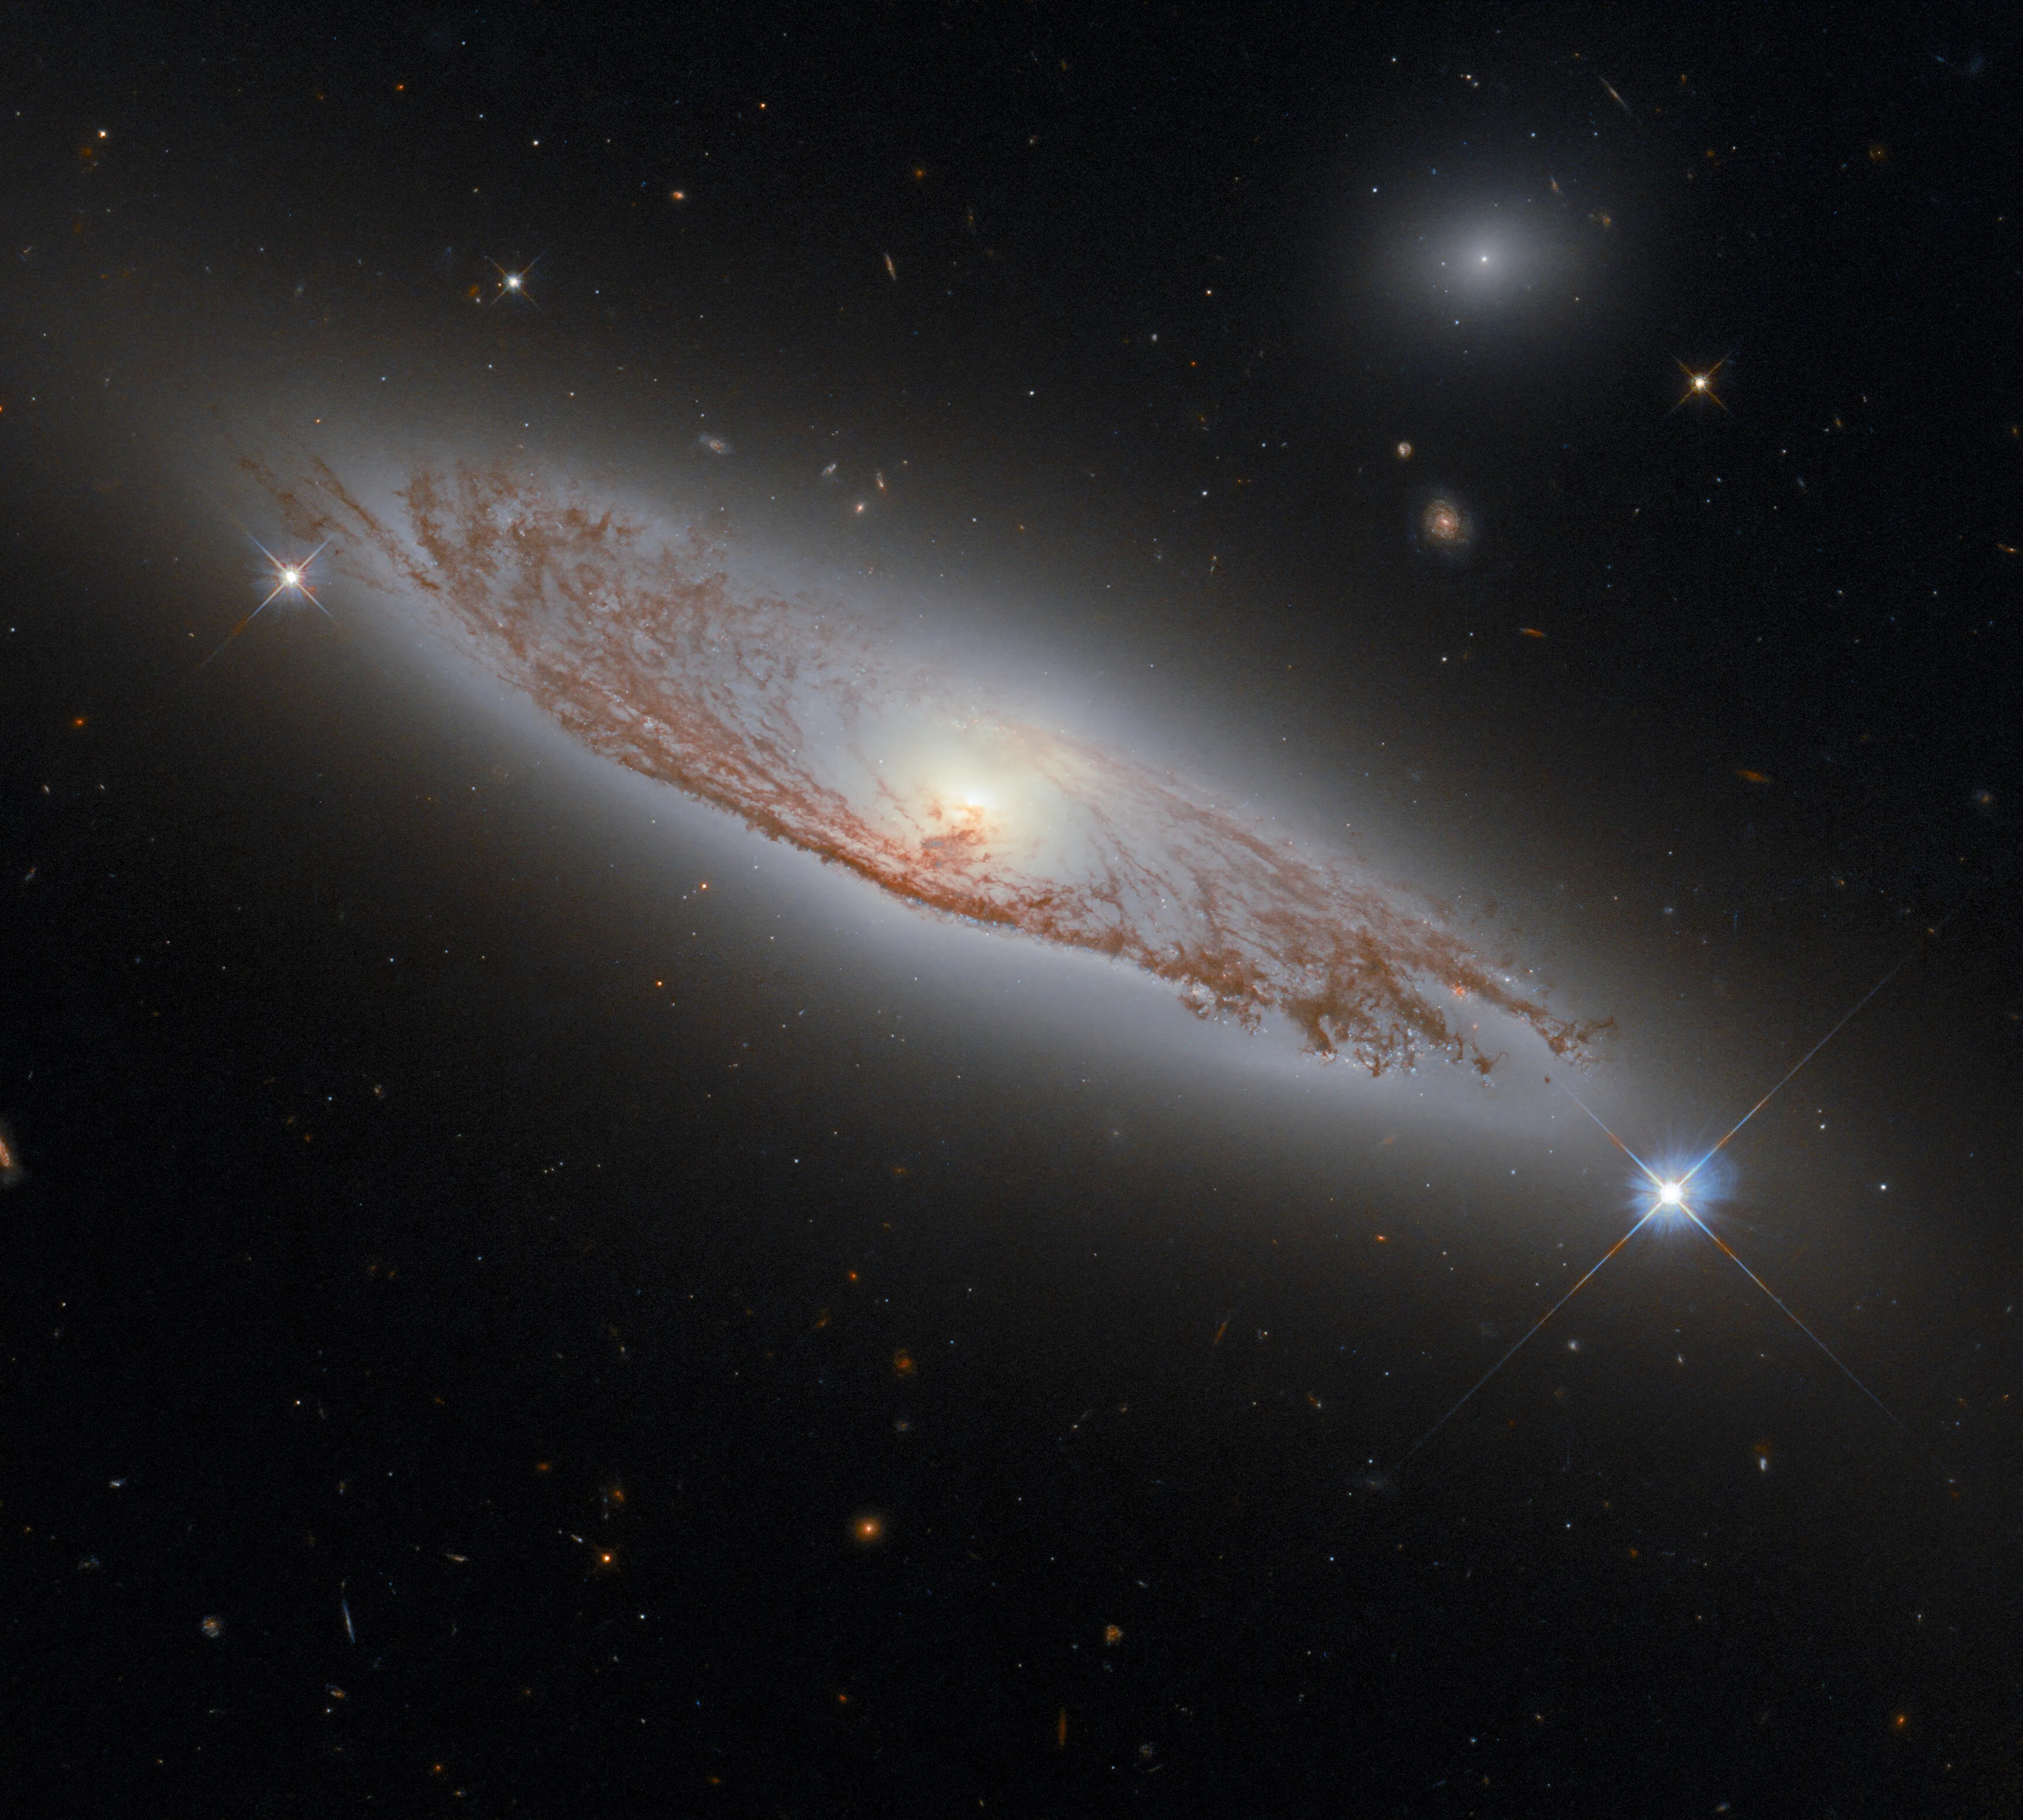 This image shows the spiral galaxy ngc 5037, in the constellation of virgo.